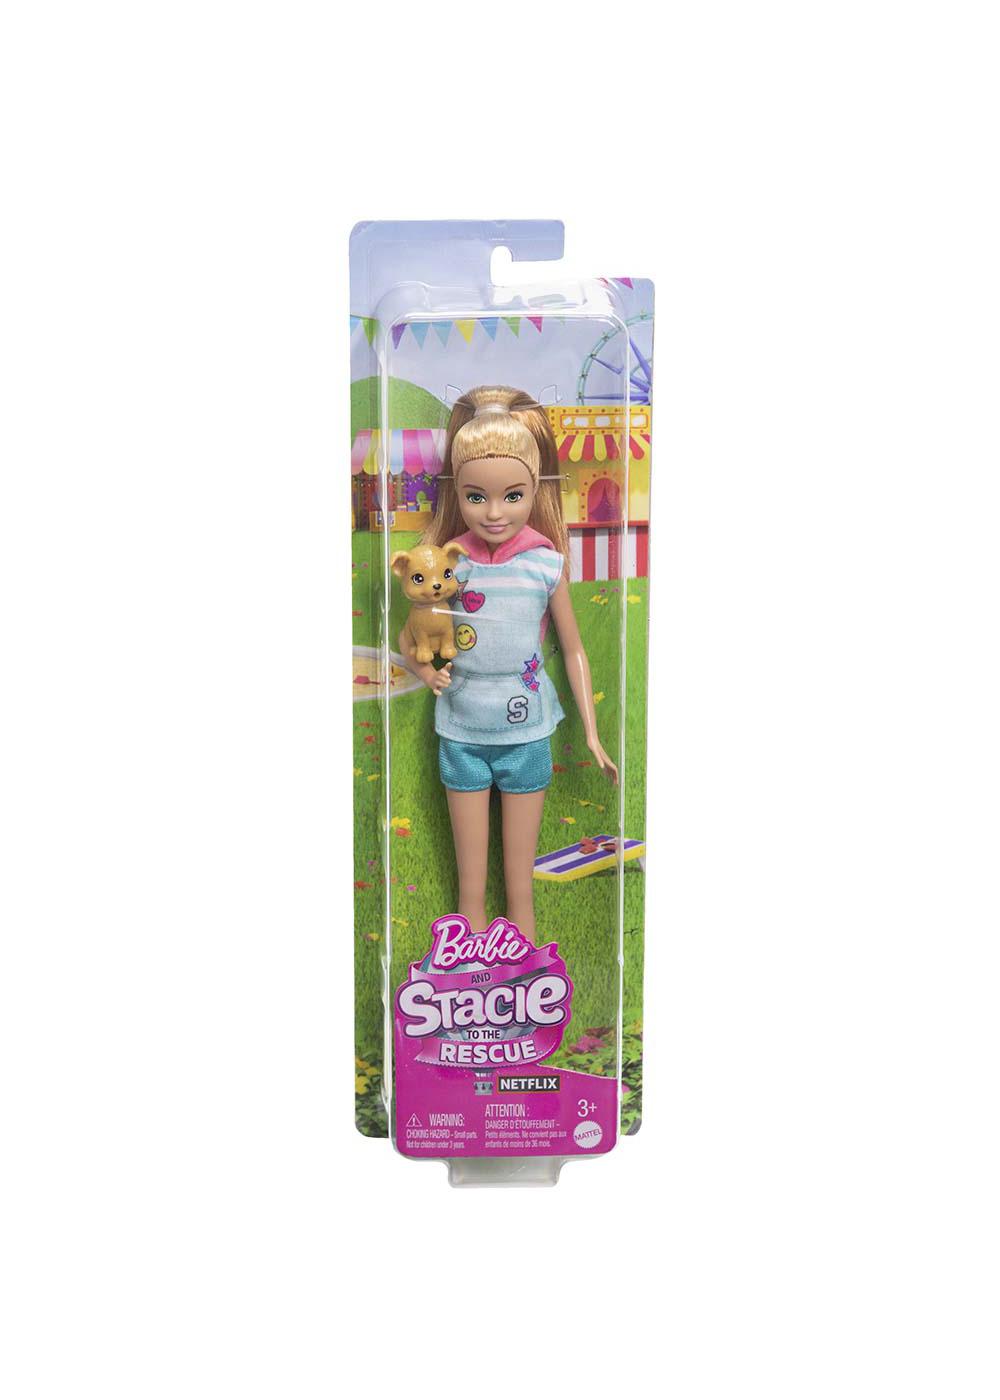 Barbie Stacie to the Rescure Fashion Doll; image 1 of 2